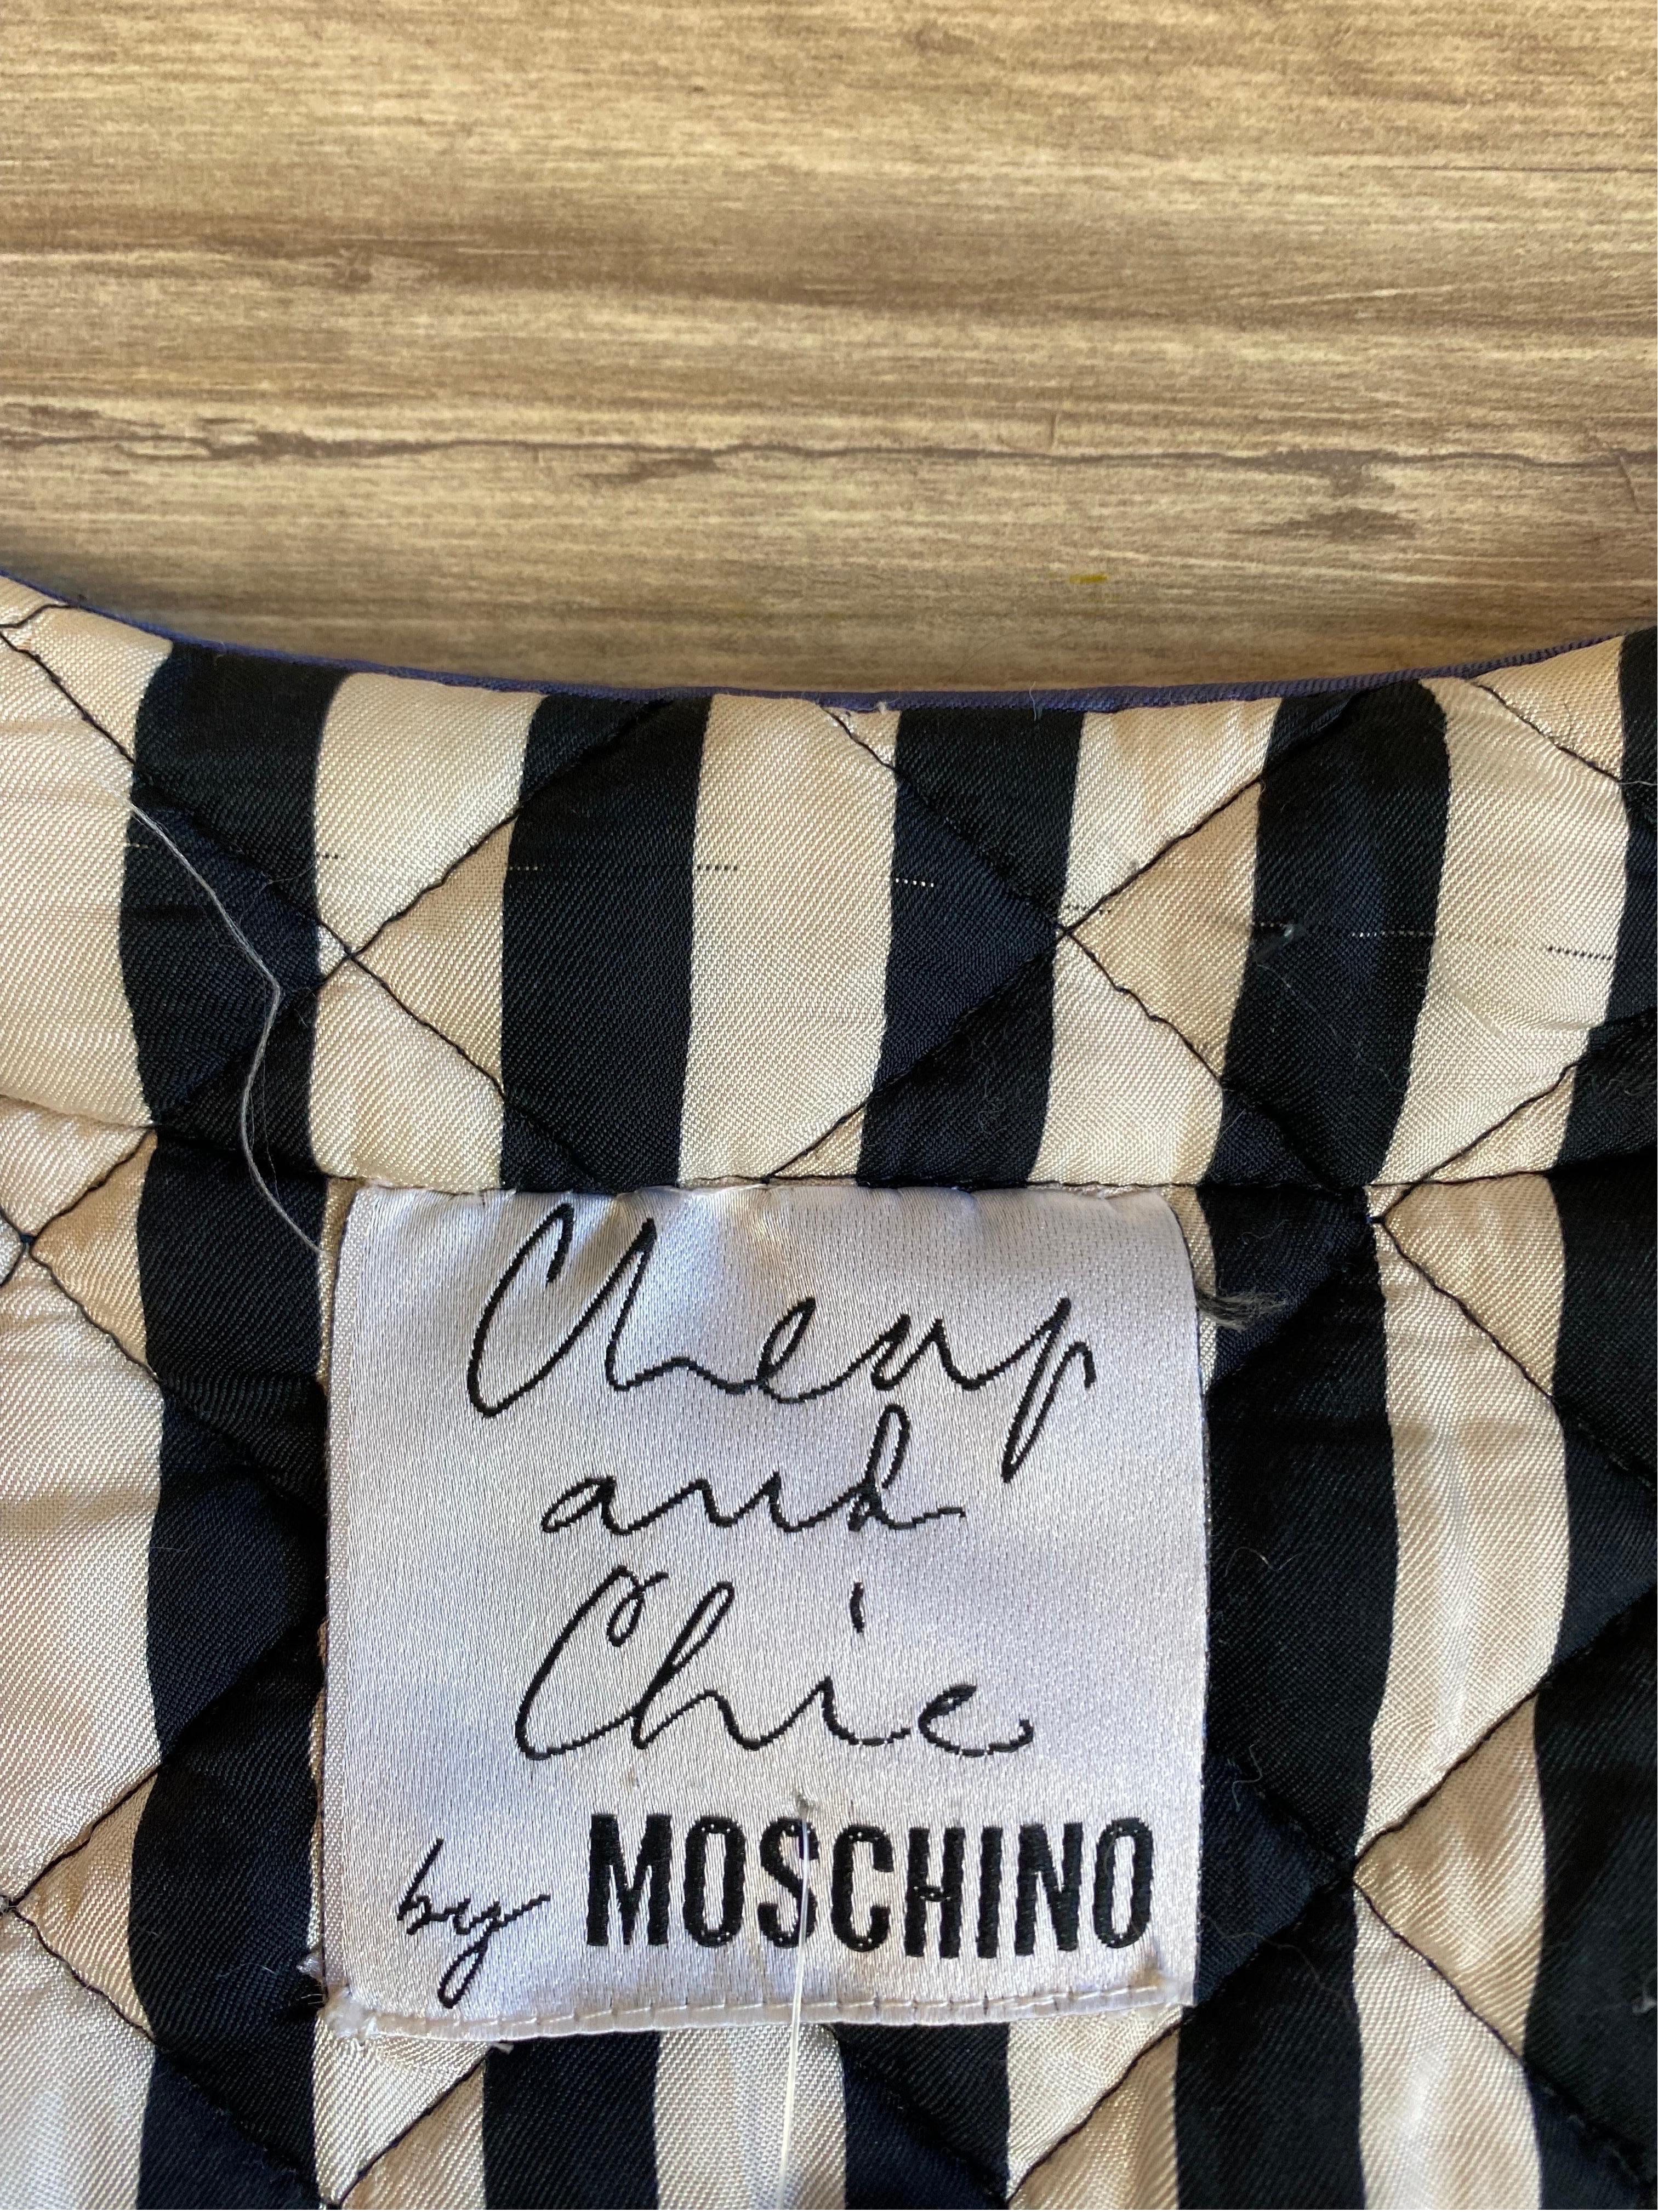 Rare Vintage Cheap and Chic jacket Moschino For Sale 4